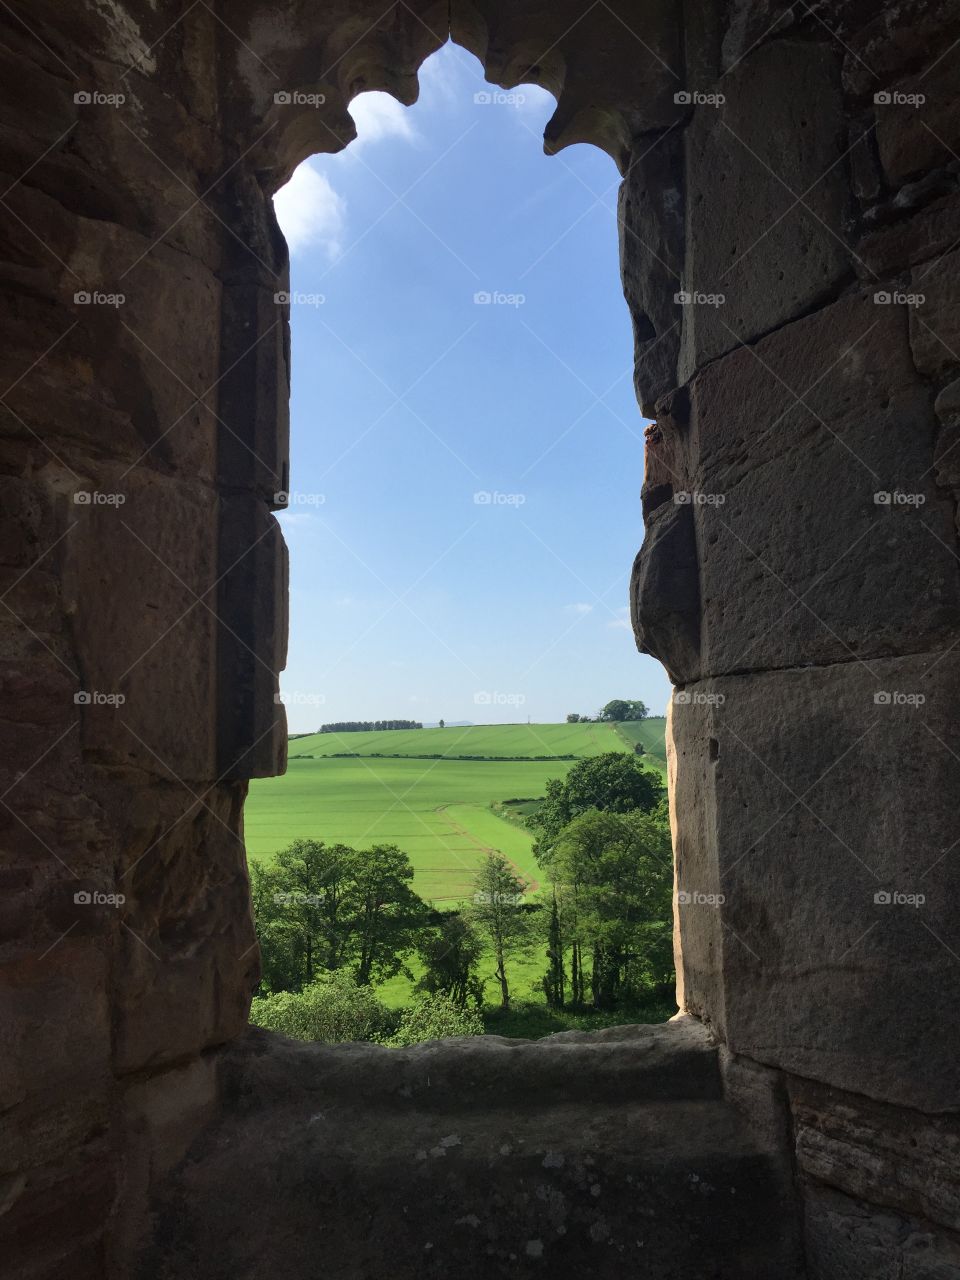 Looking through the remains of an old window at Raglan Castle, Wales. In the distance, luscious green grass with clear blue skies.